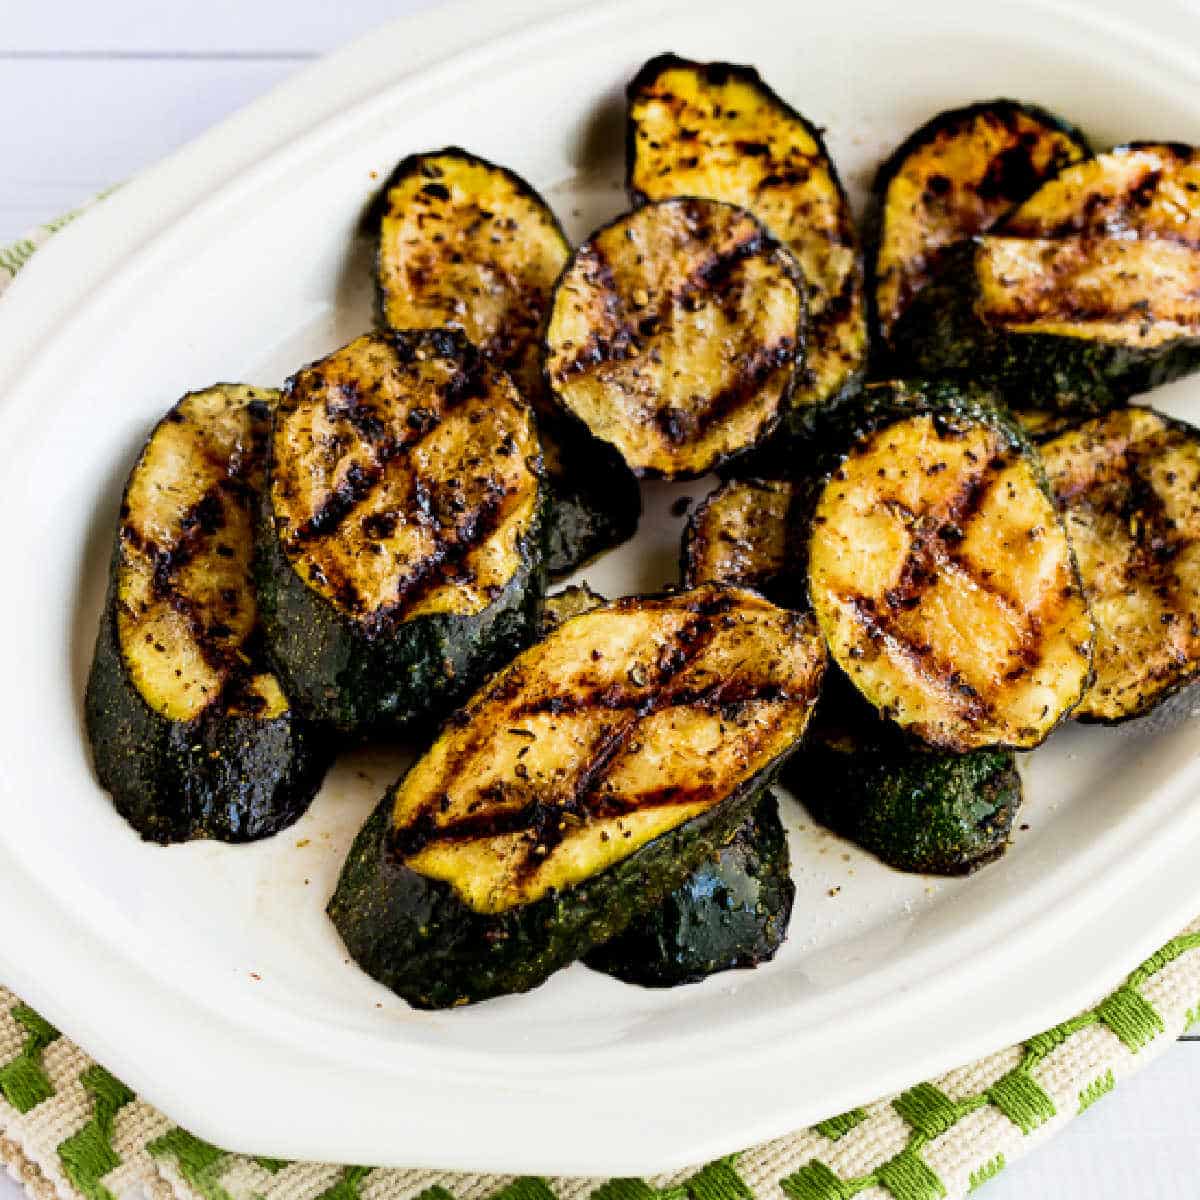 Square image for How to Grill Zucchini showing zucchini on serving plate.